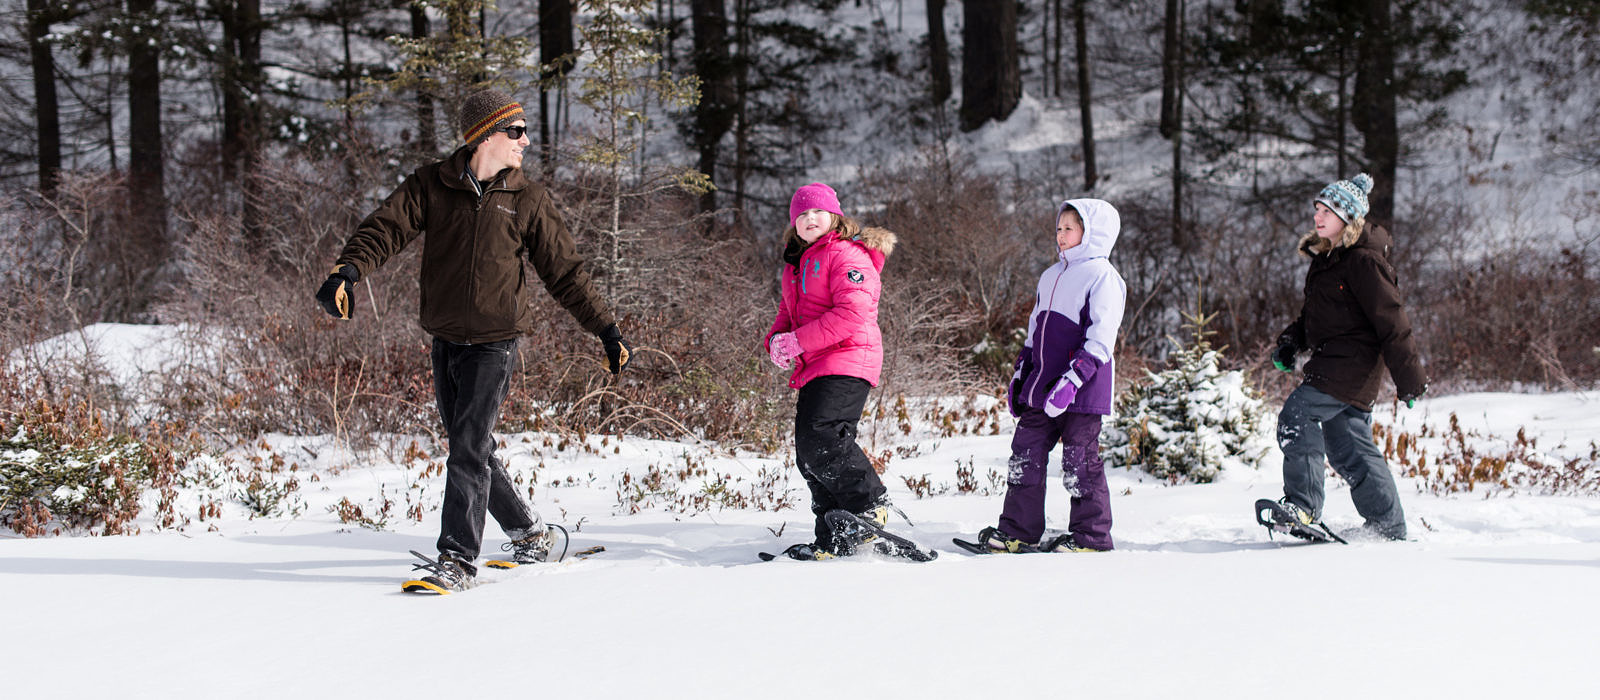 Harris Center naturalist John Benjamin leads 4th graders on a snowshoeing outing. (photo © Ben Conant)